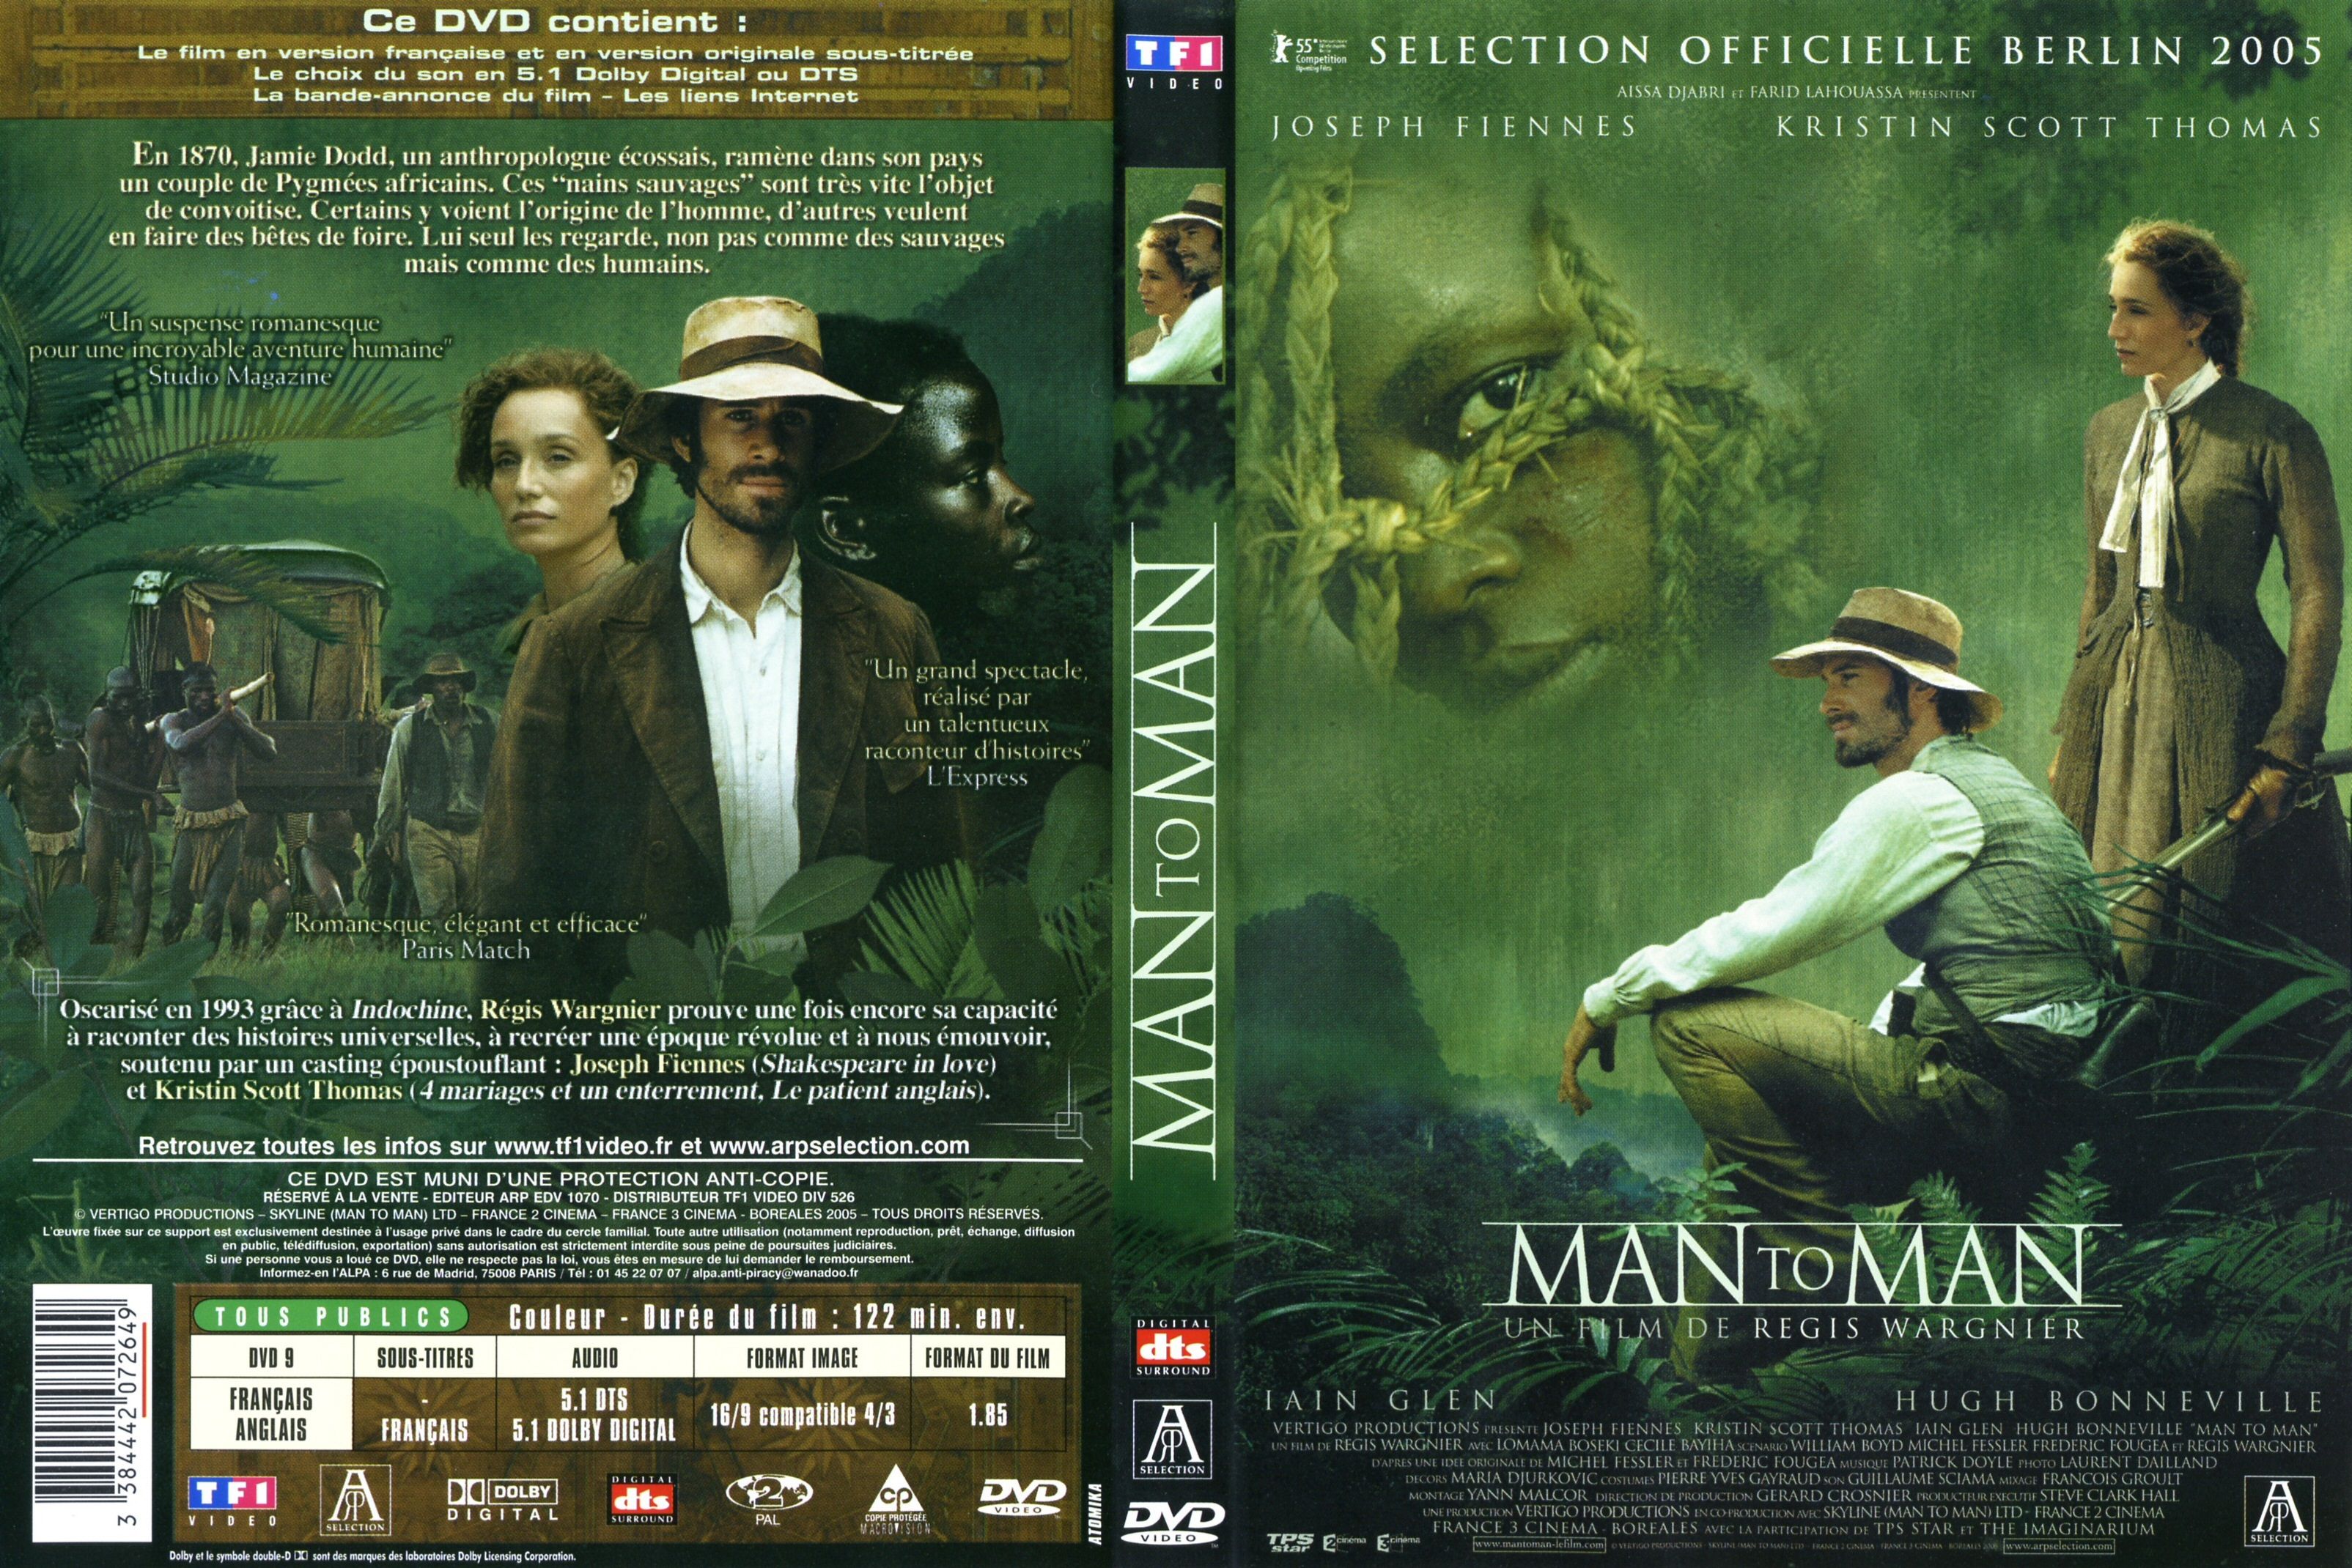 Jaquette DVD Man to man